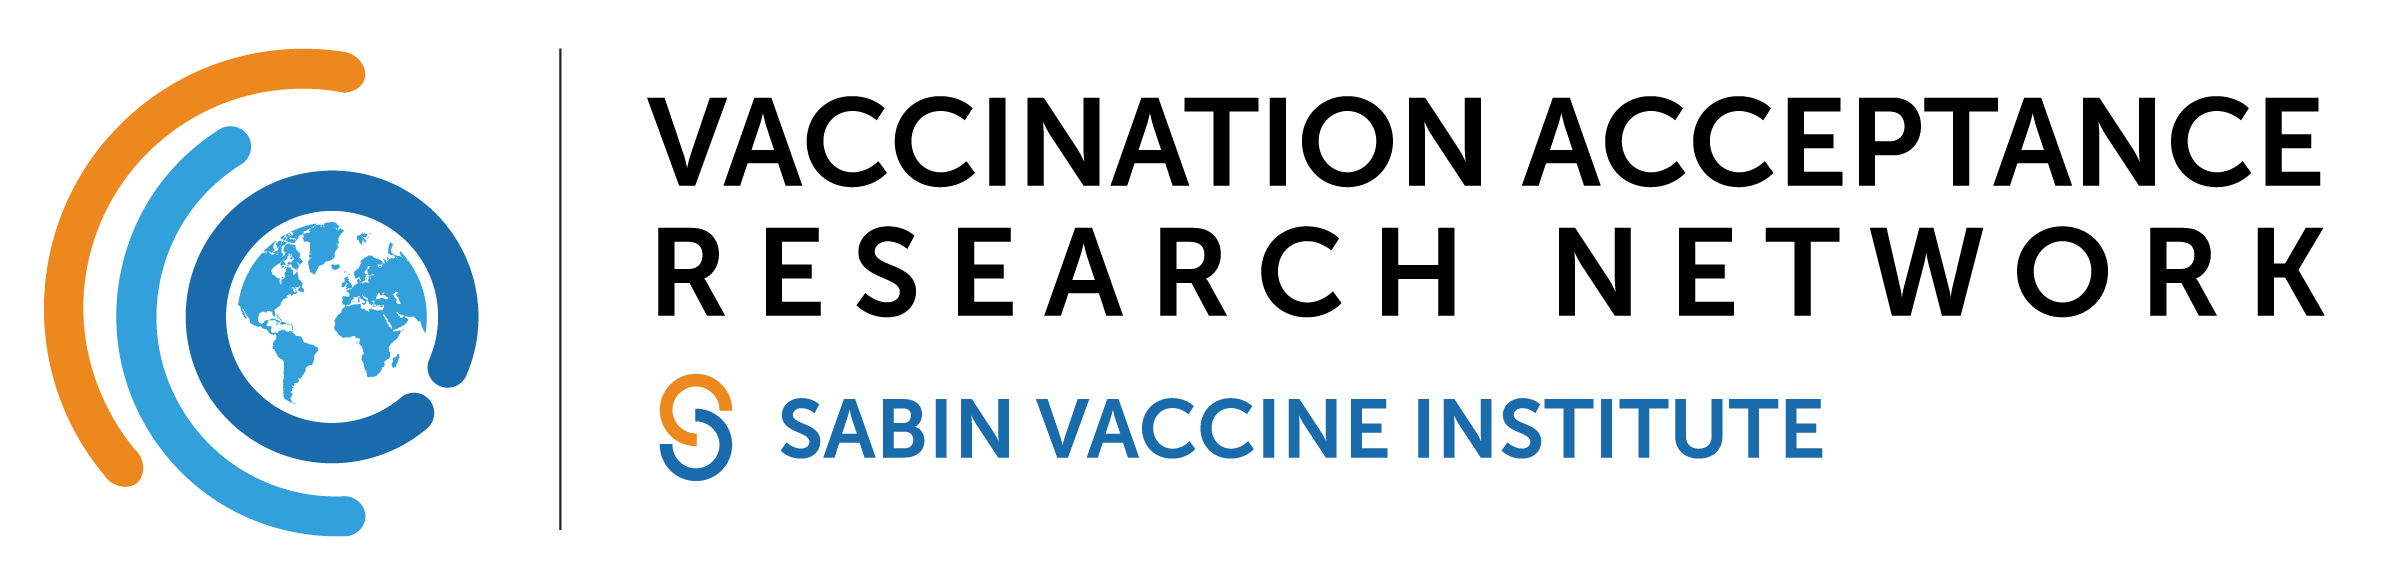 The Vaccination Acceptance Research Network logo is depicted here.